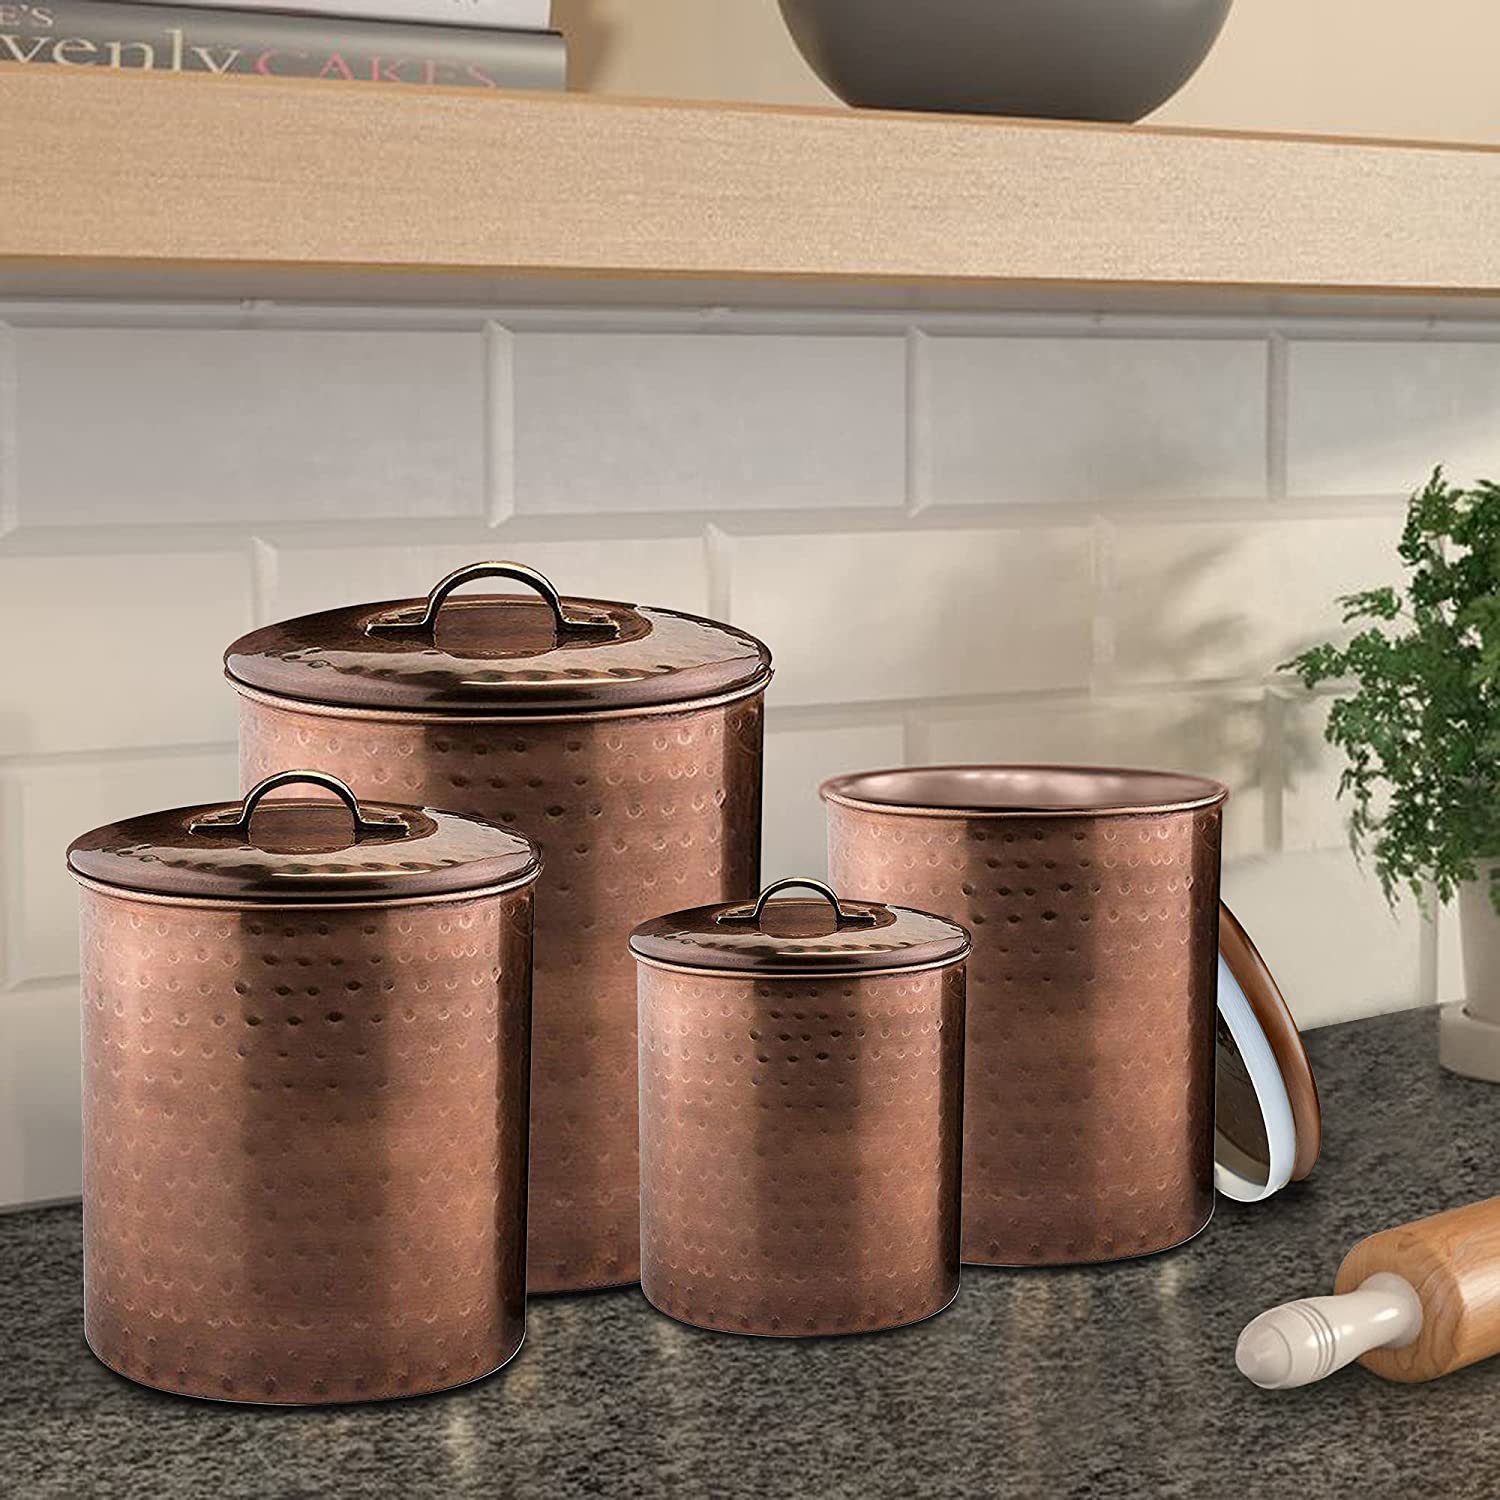 Hammered Antique Copper Stainless Steel 4pc Canister Set